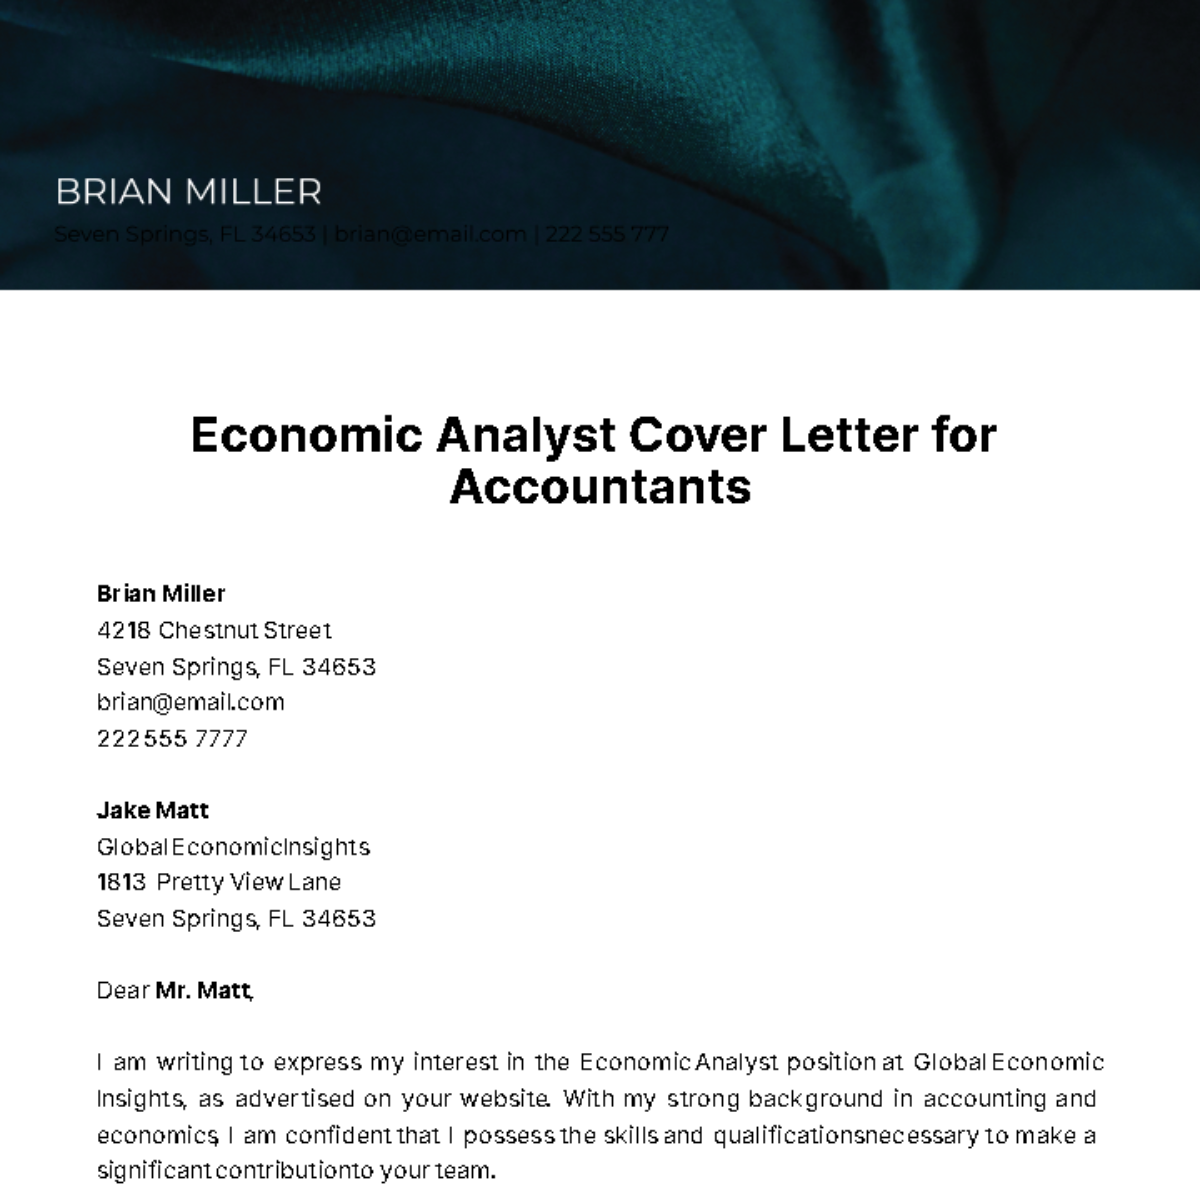 Economic Analyst Cover Letter for Accountants Template